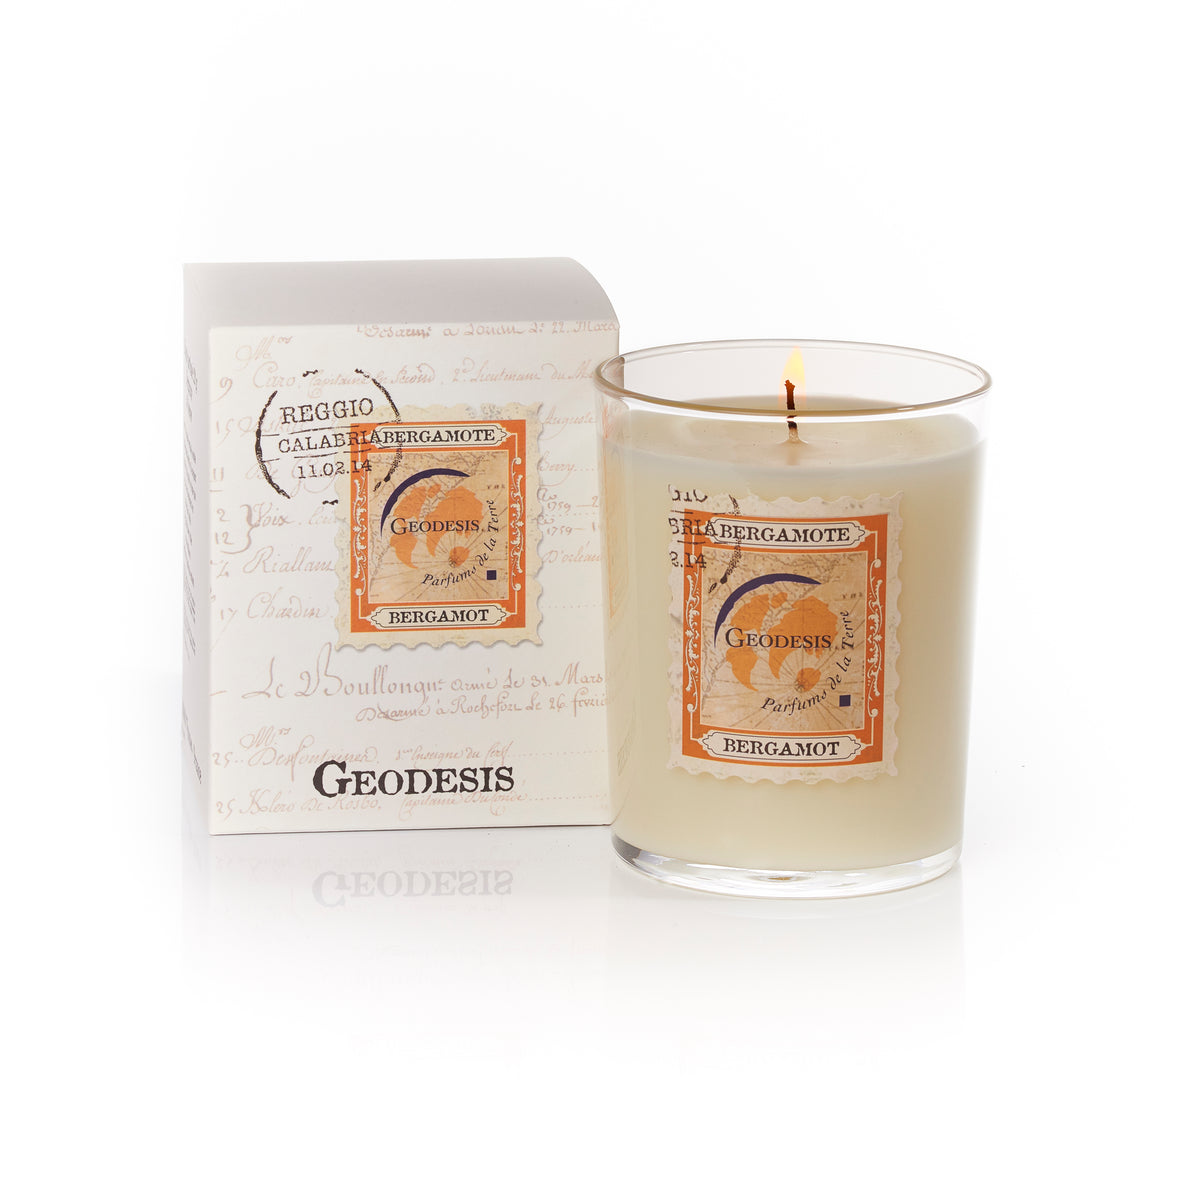 Geodesis Bergamot 220gm Scented Candle